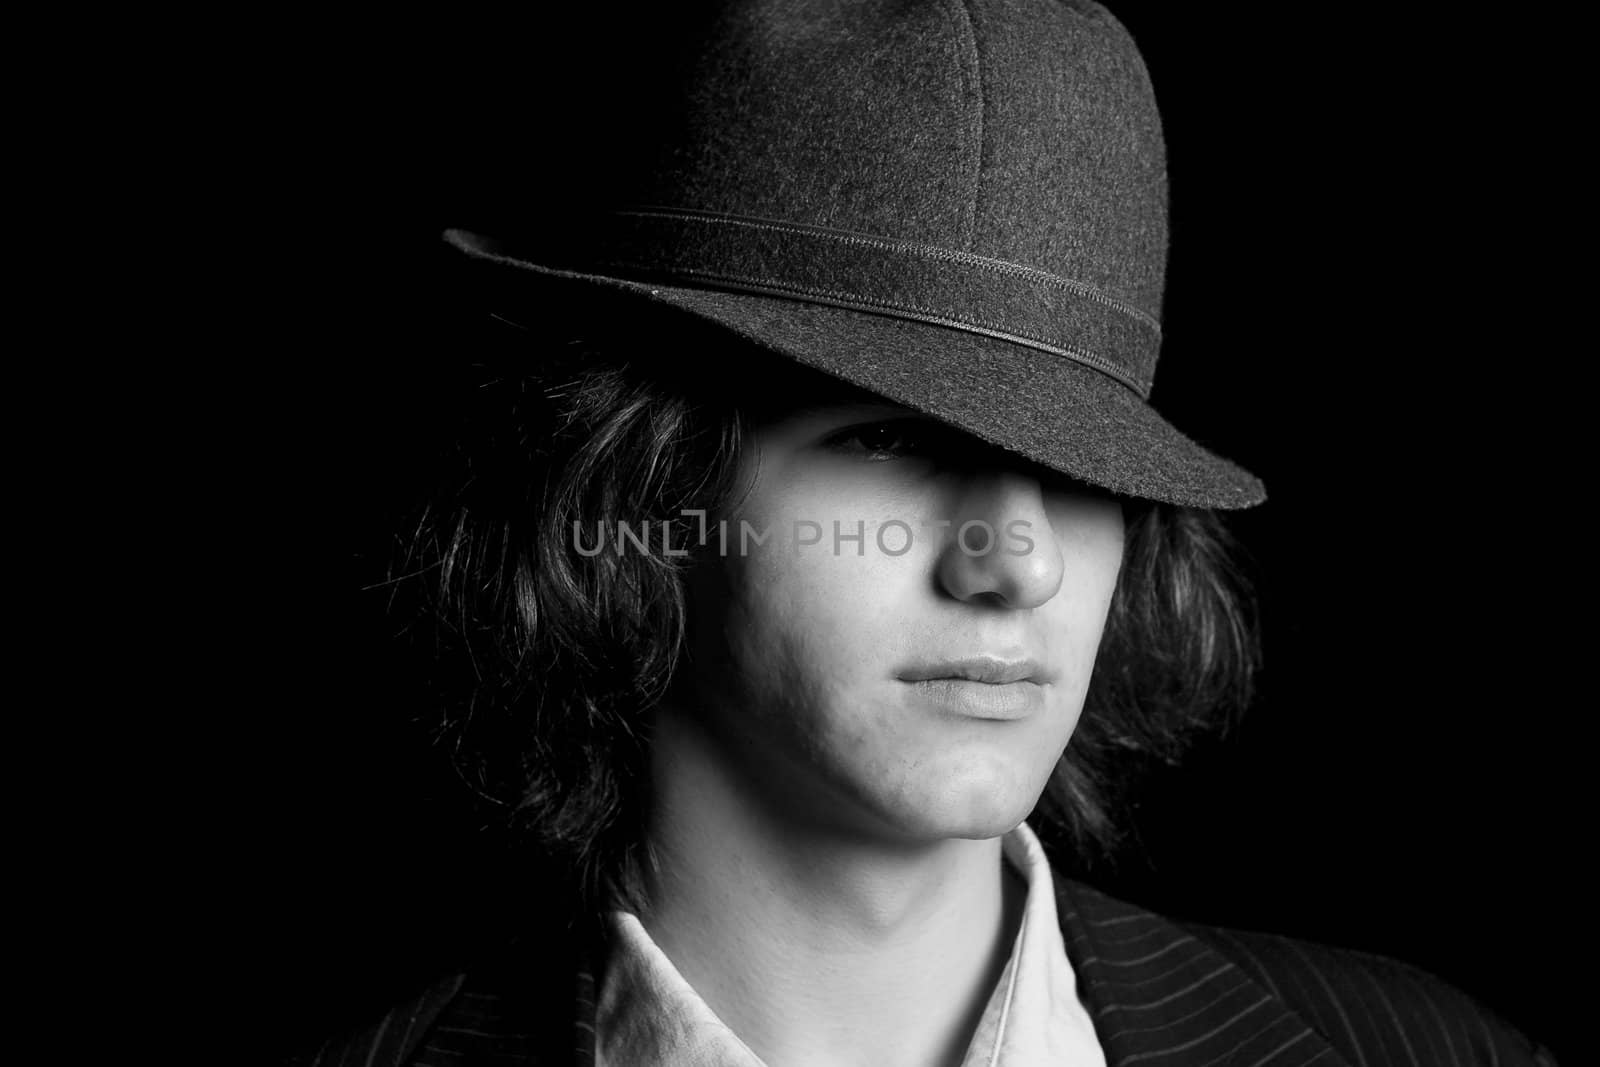 Male teenager wearing a suit and hat with sad expression